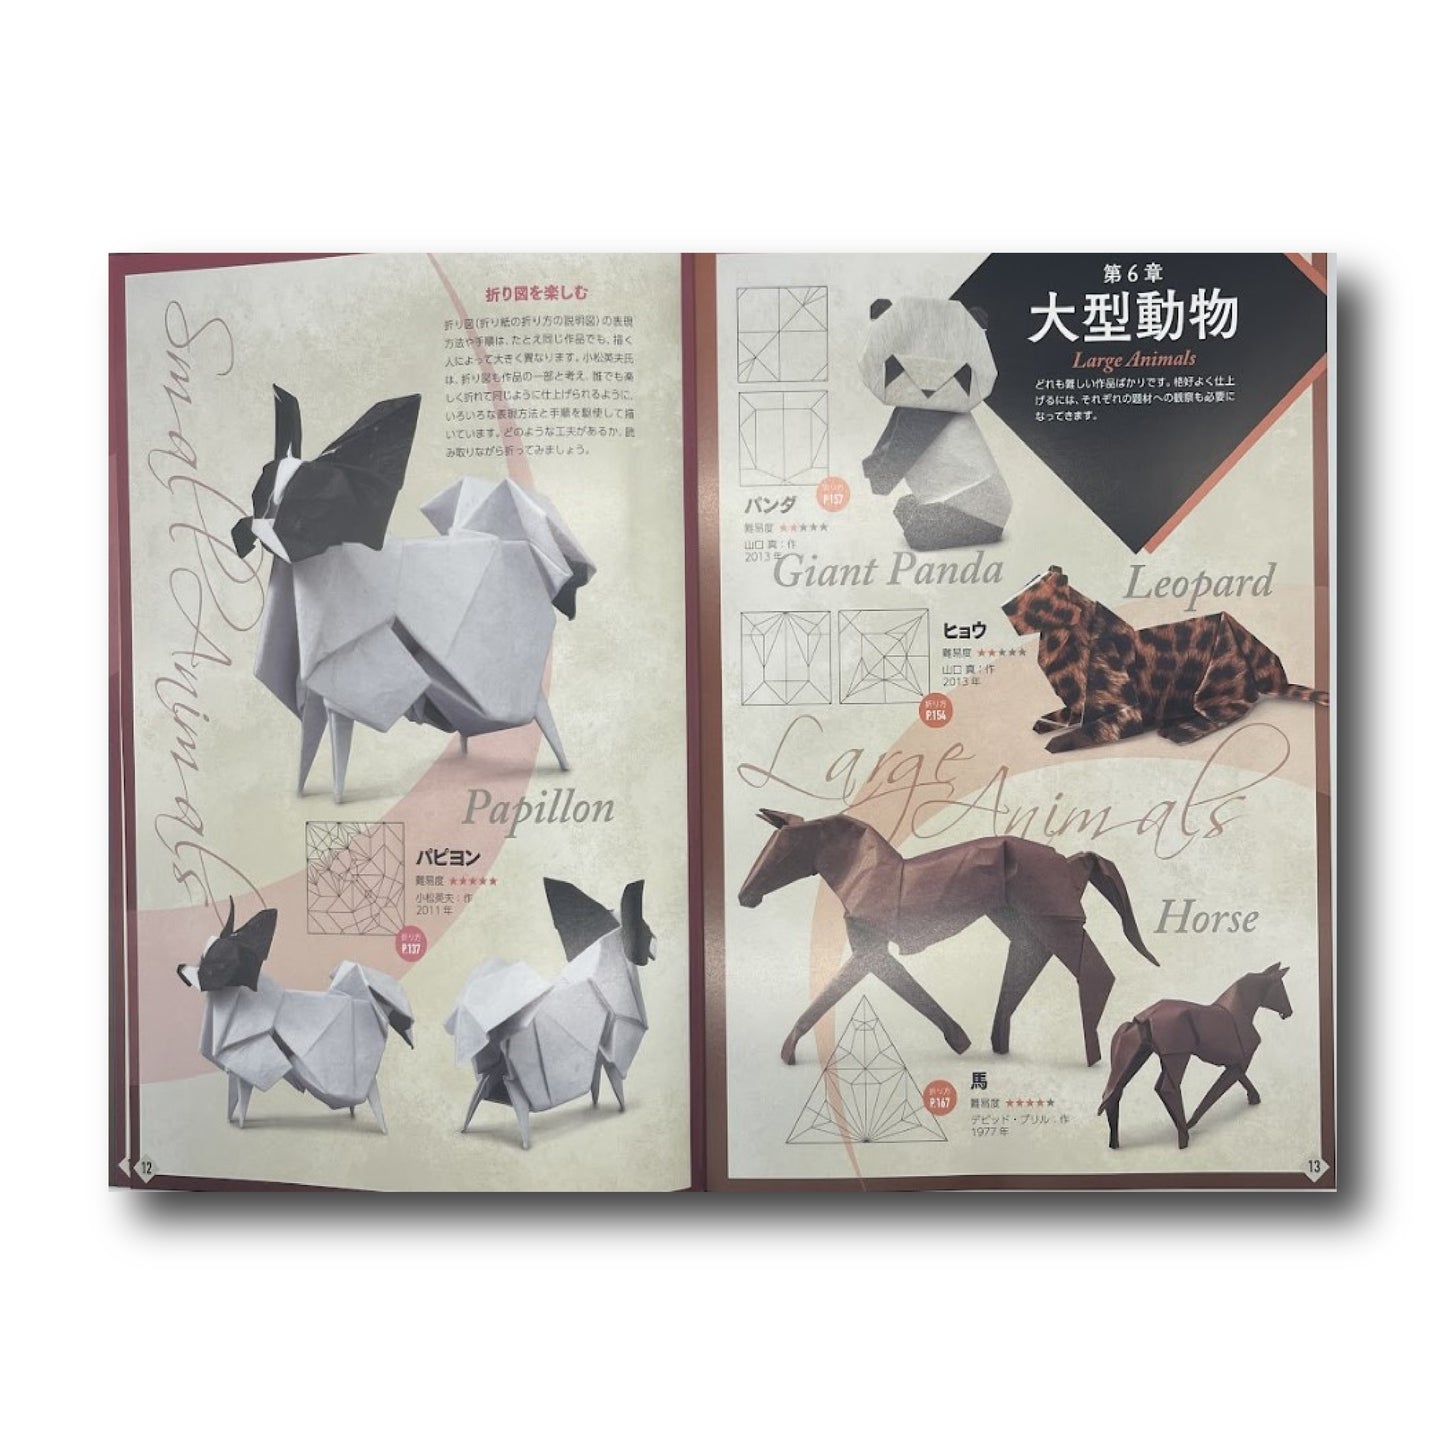 The Beauty of Origami (Japanese Edition)